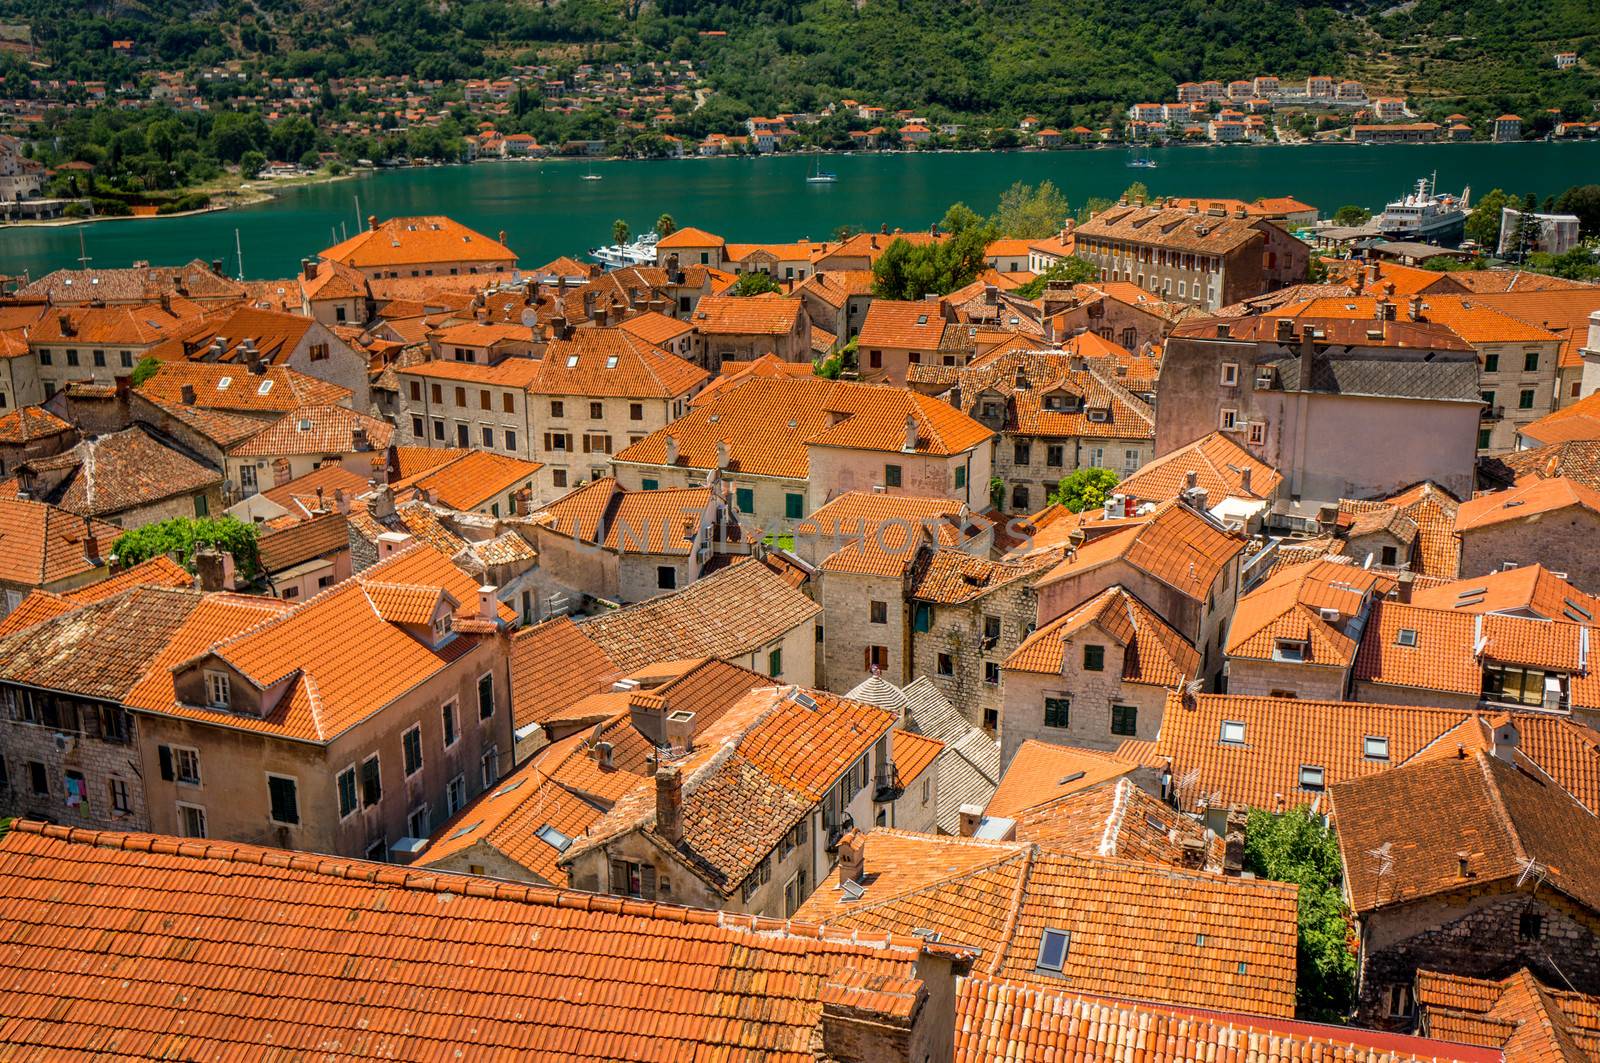 Roof tops of the old town of Kotor